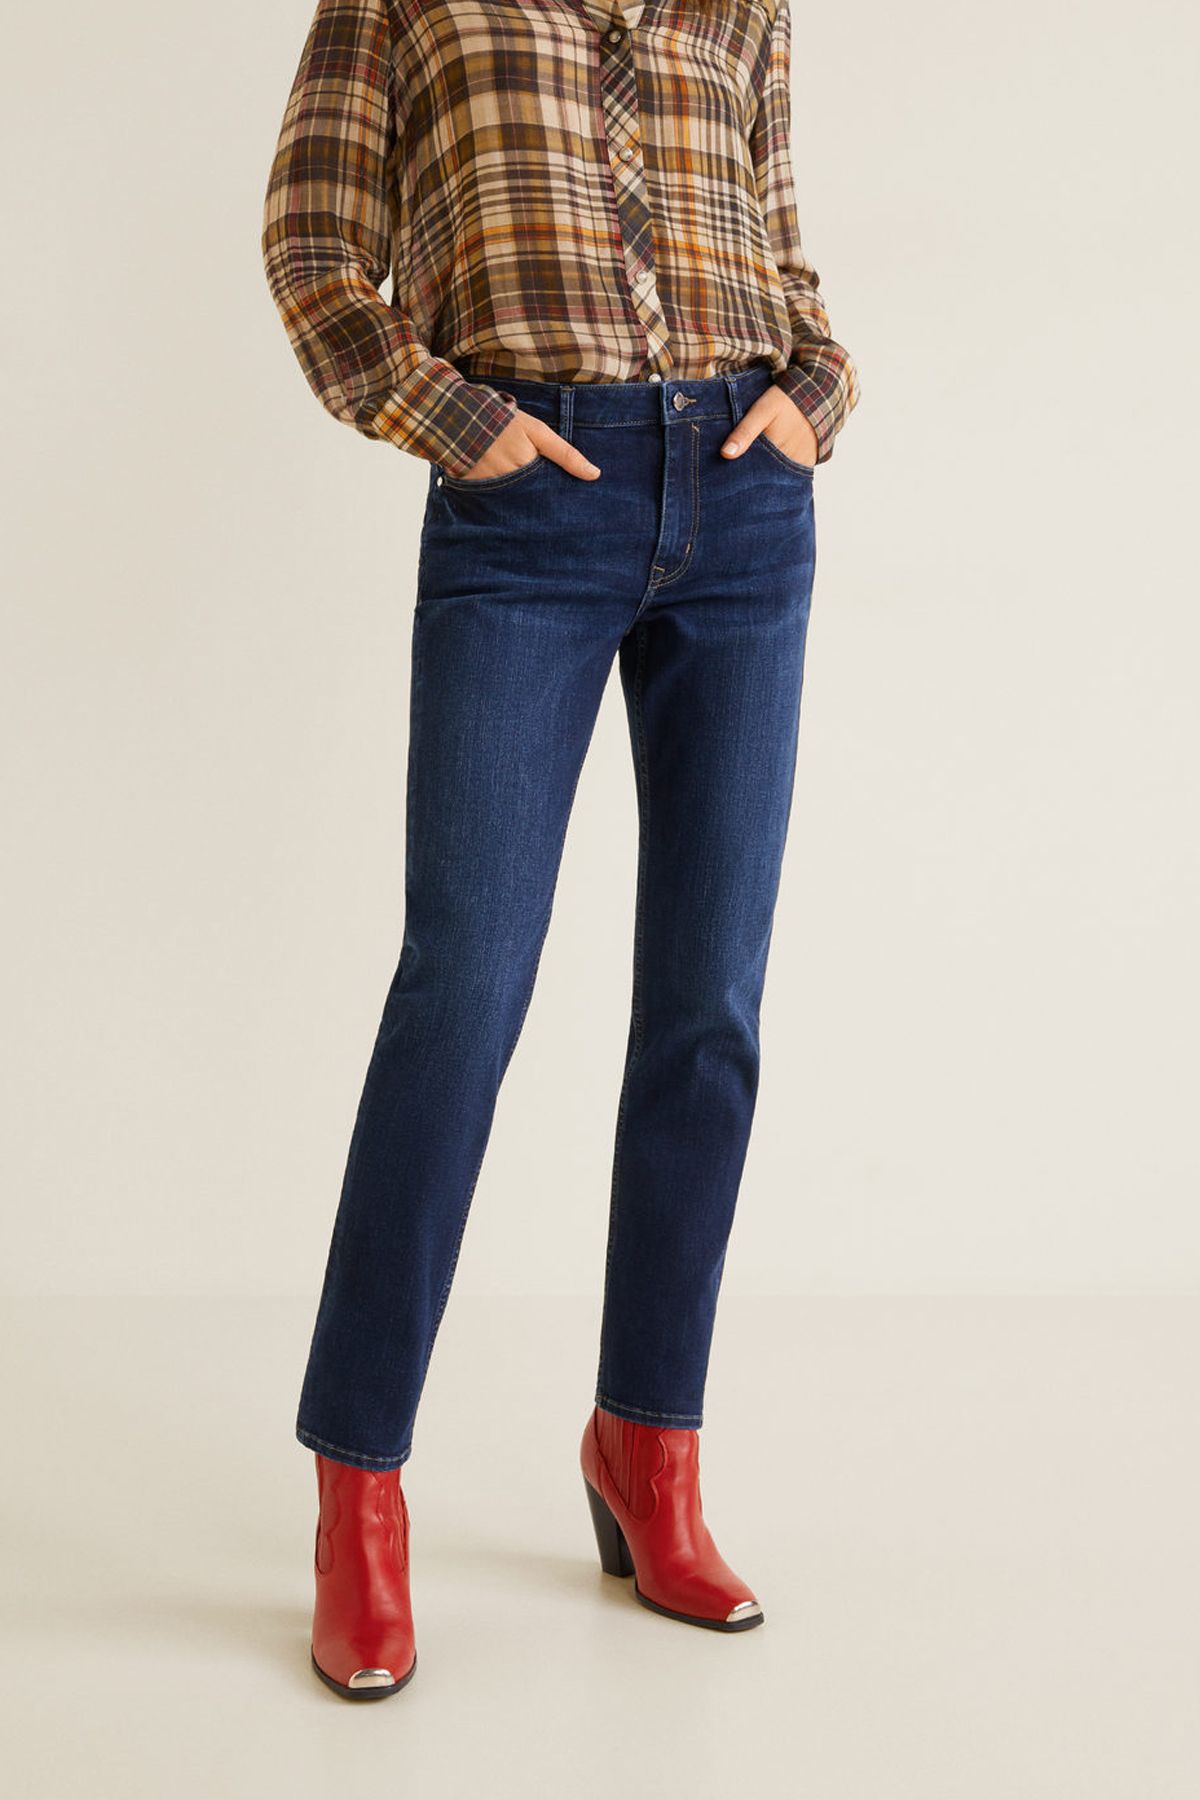 mobil band Begge MANGO Relaxed Lonny Jeans Dark Blue Women Jeans|akgalleria.com